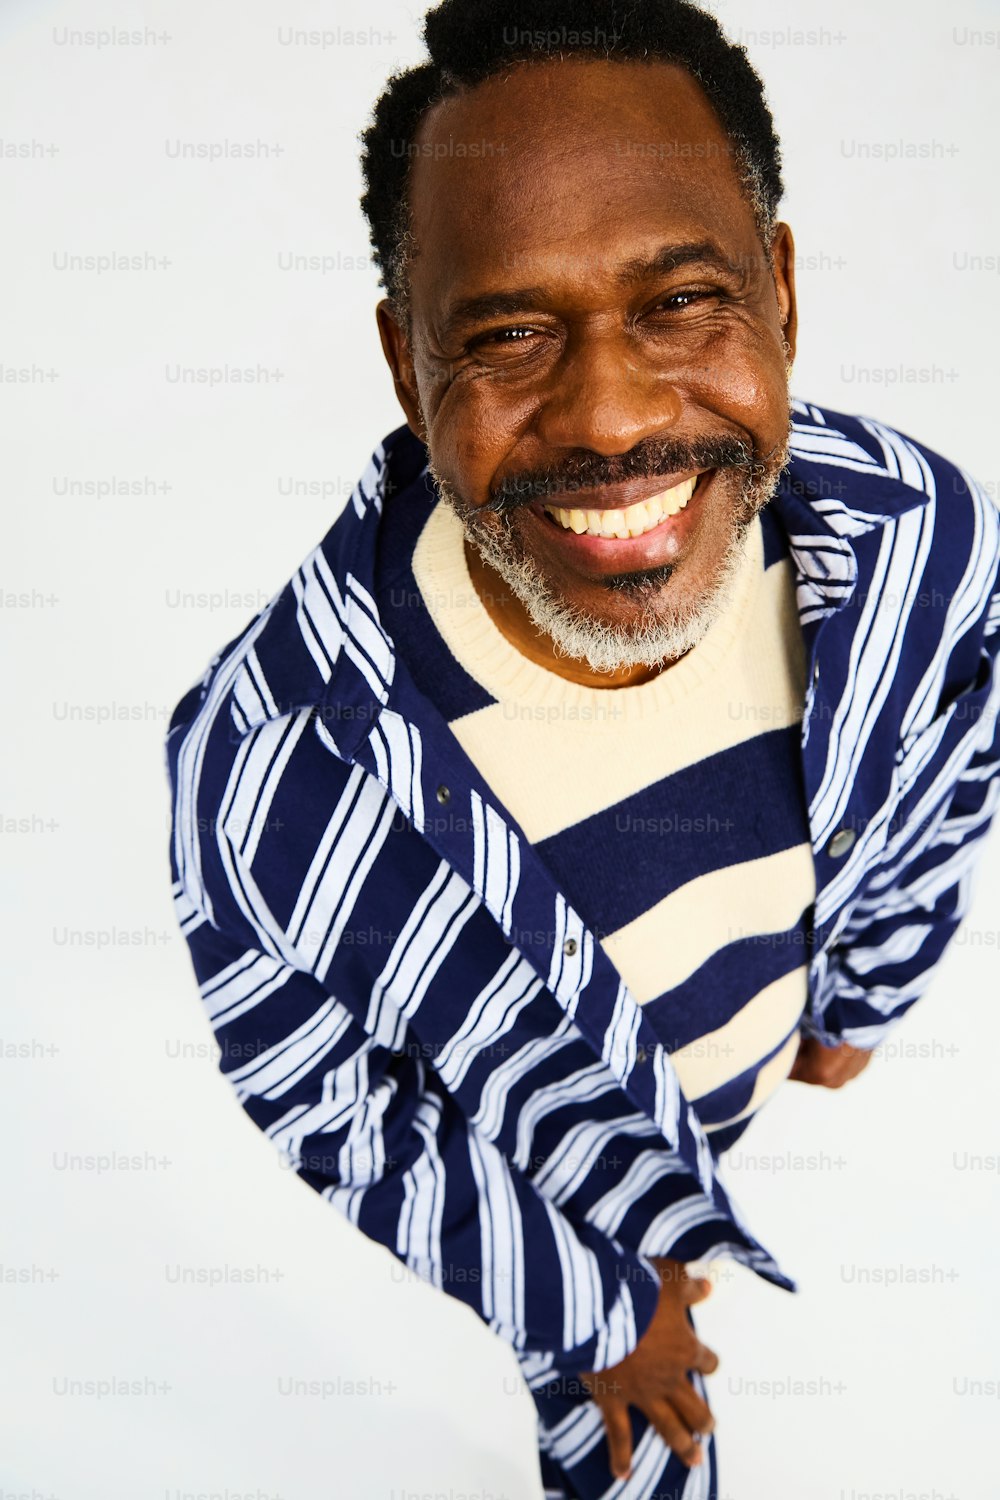 a smiling man in a striped shirt and tie